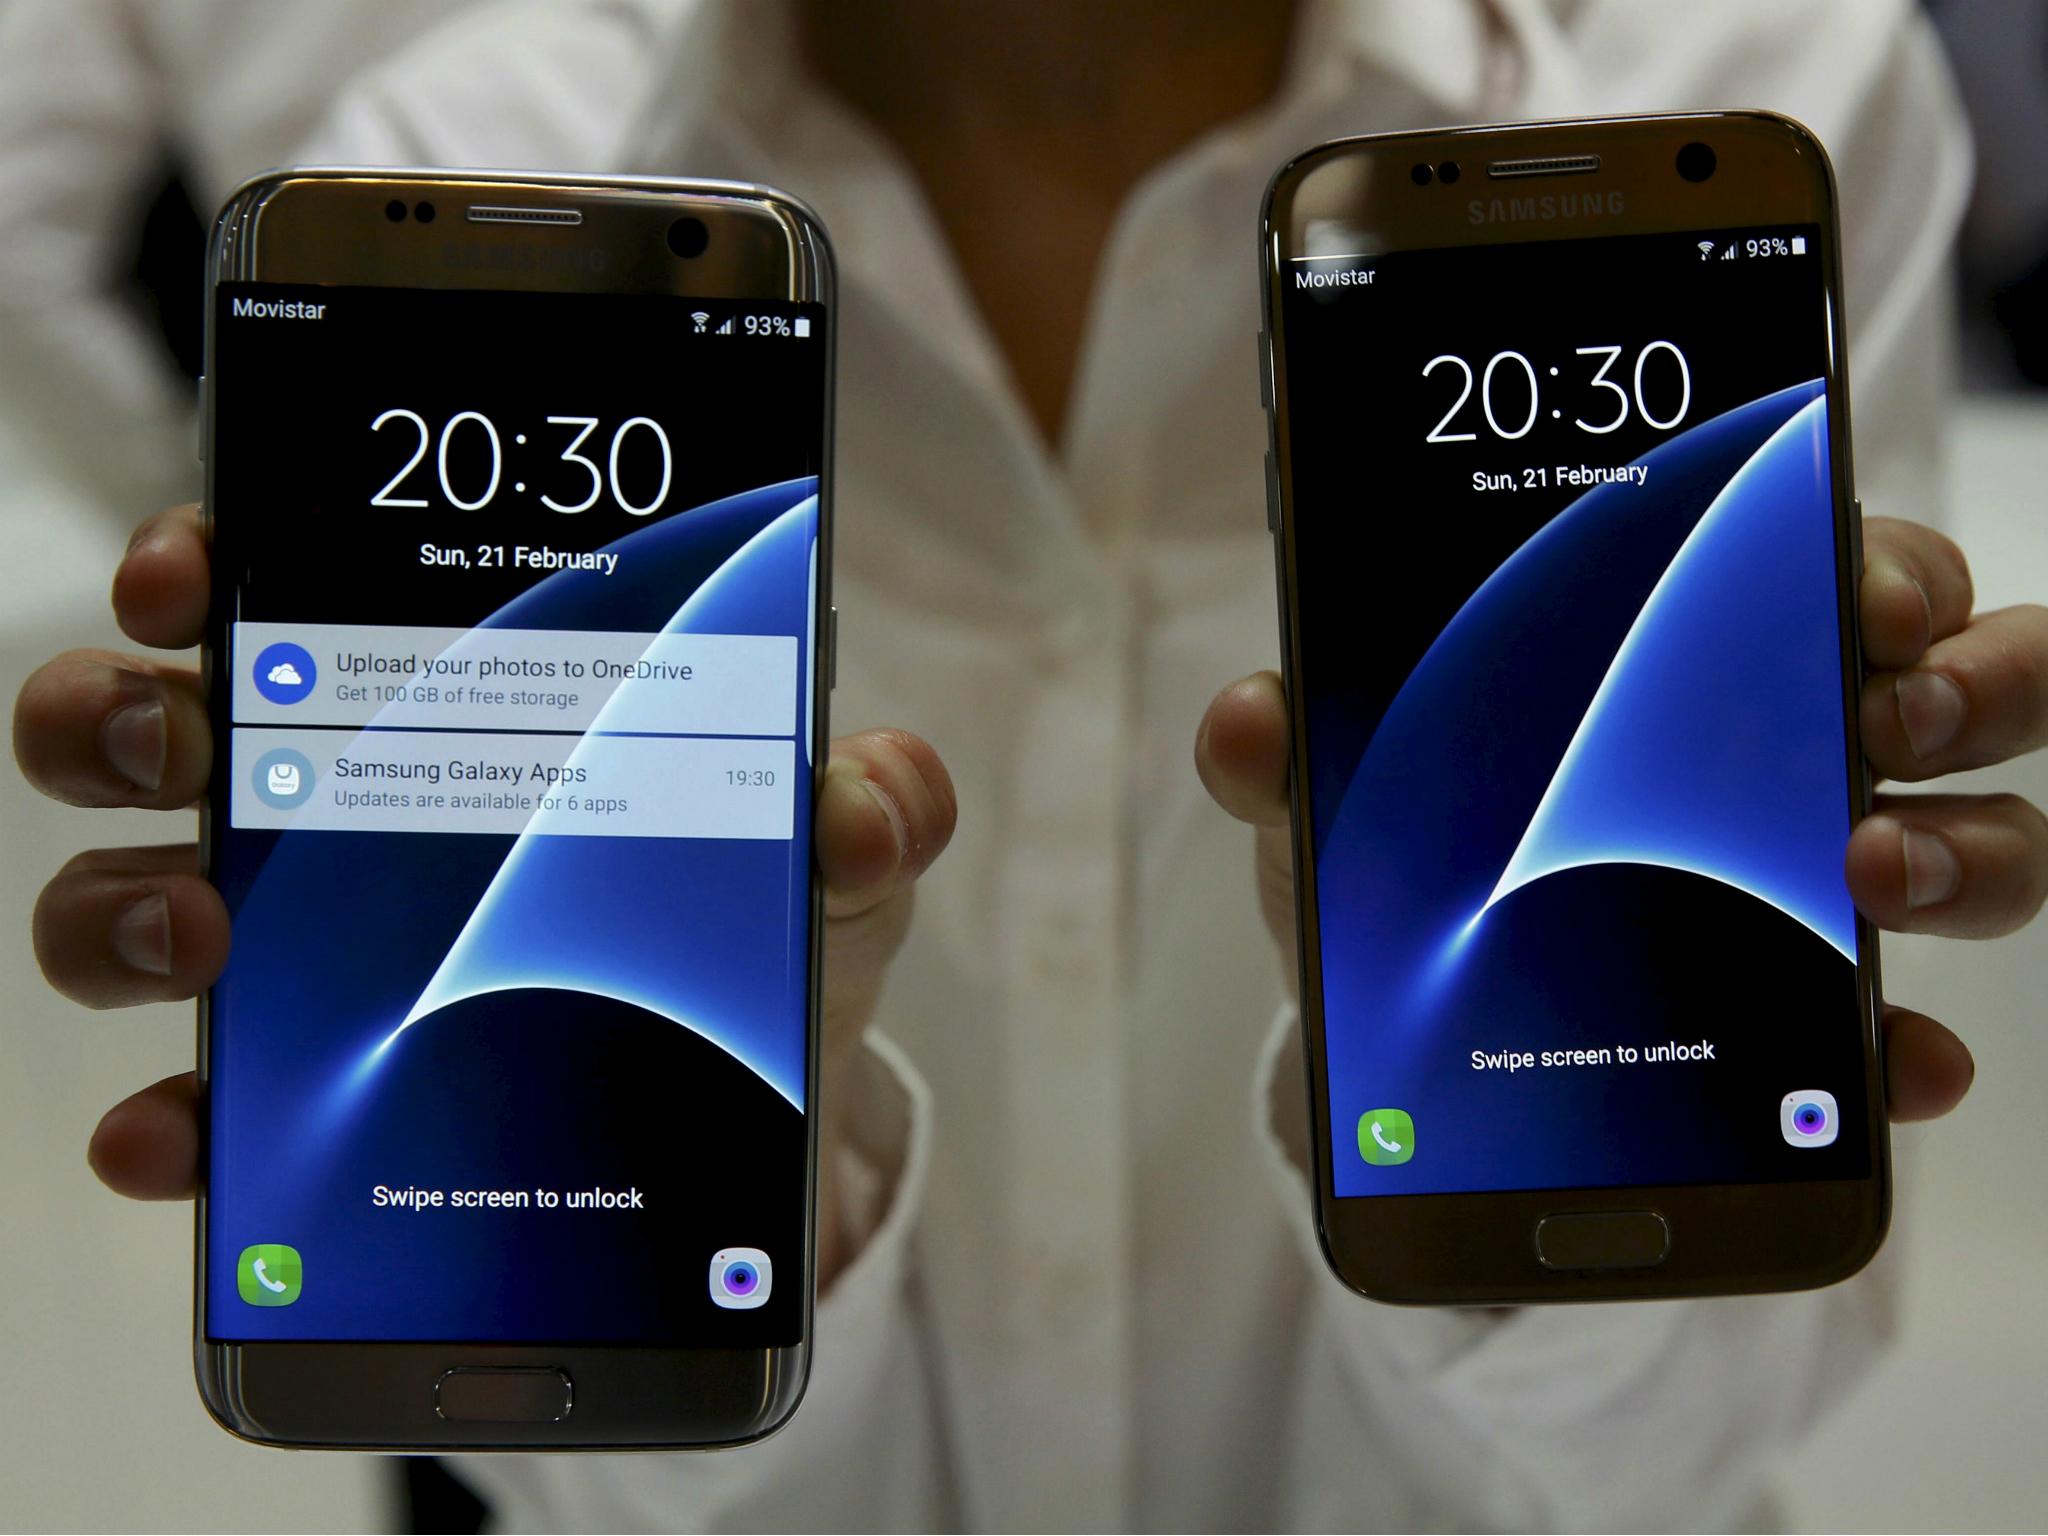 Bixby is expected to be capable of recognising text and real-world objects through the Galaxy S8’s camera